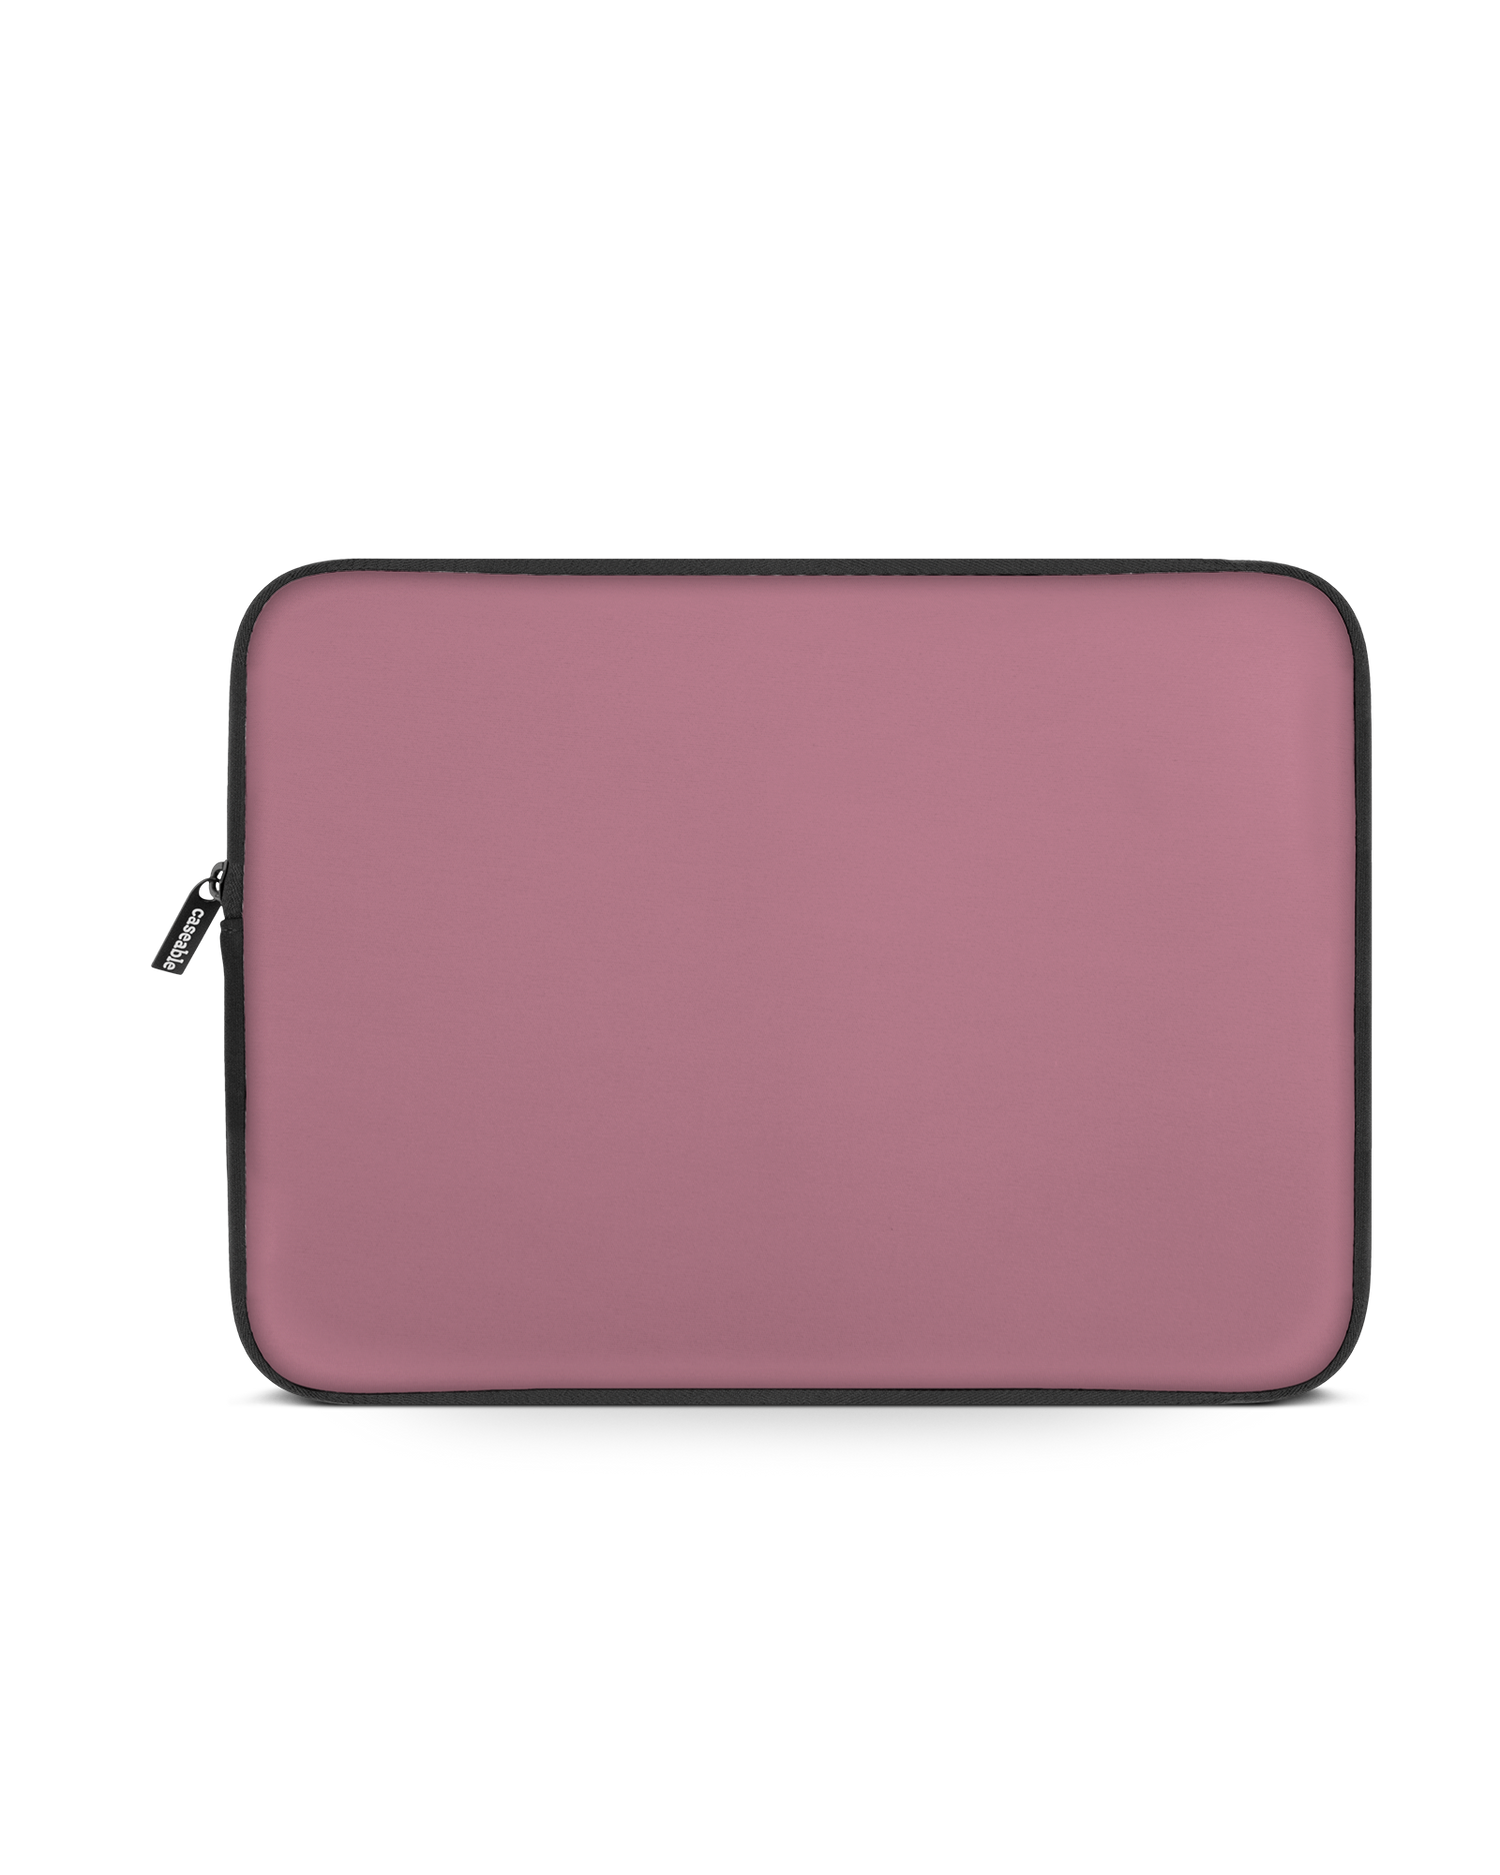 WILD ROSE Laptop Case 13 inch: Front View